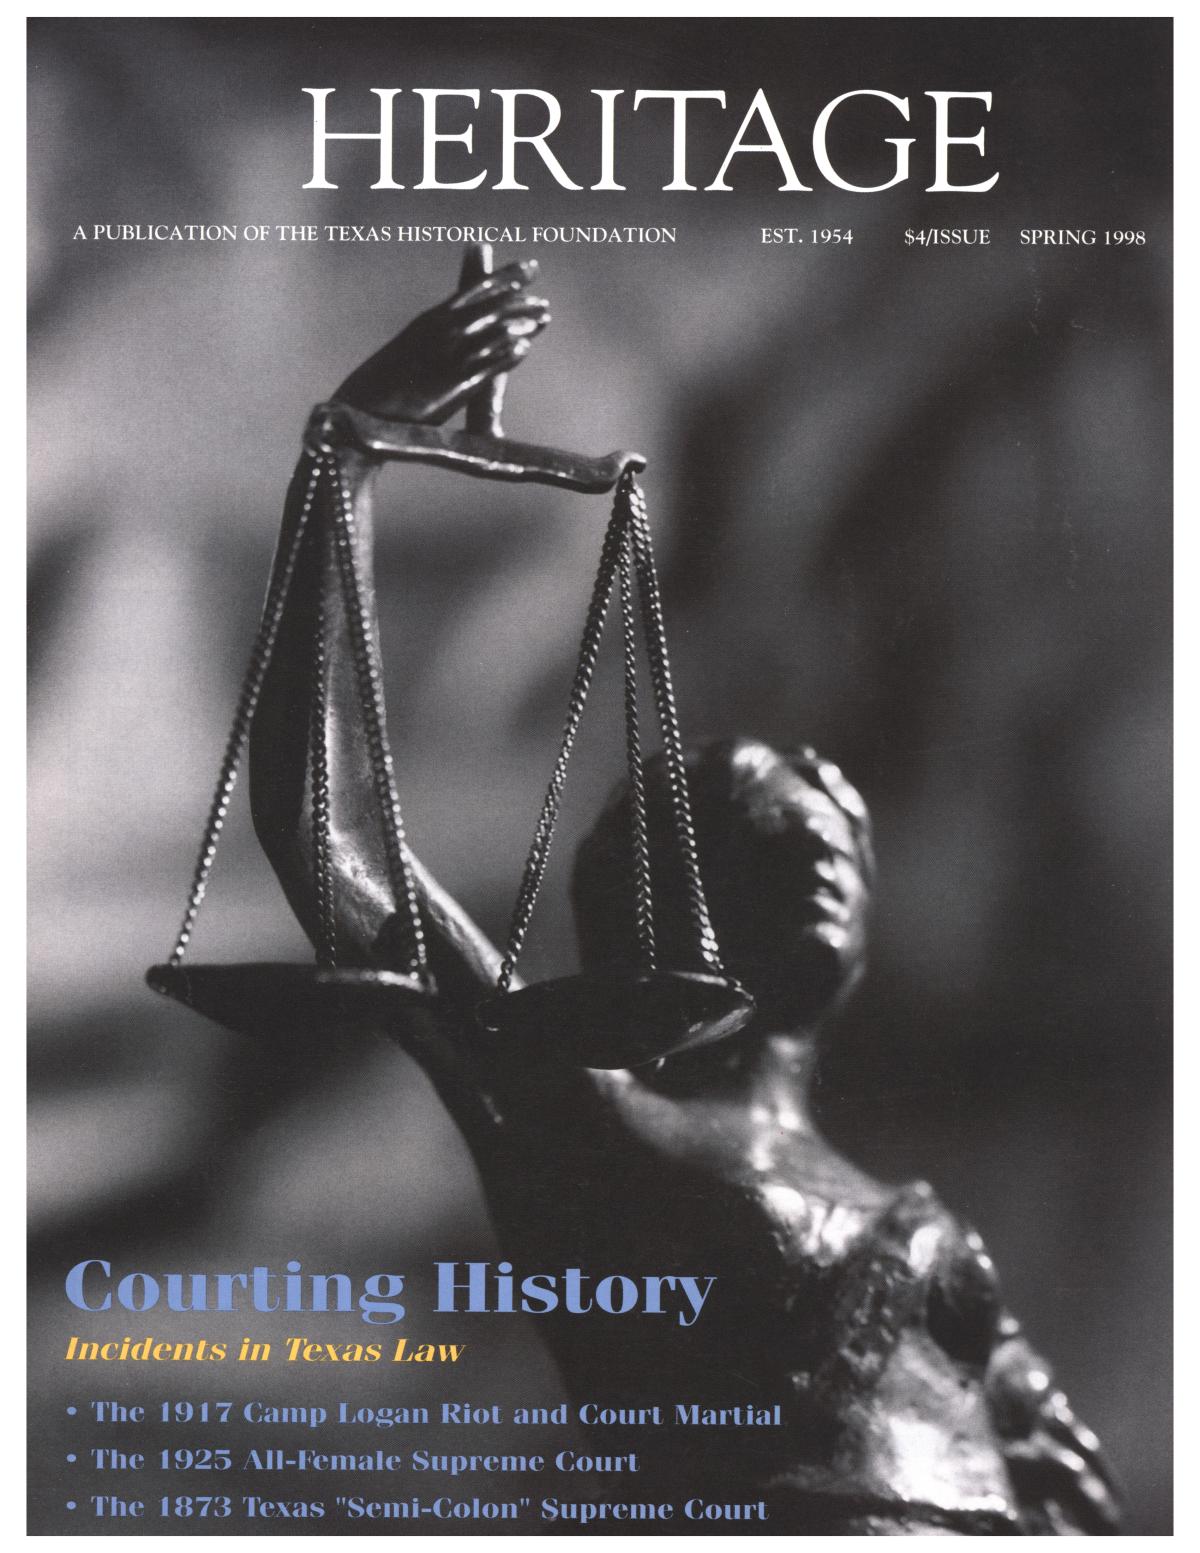 Heritage, Volume 16, Number 2, Spring 1998
                                                
                                                    Front Cover
                                                